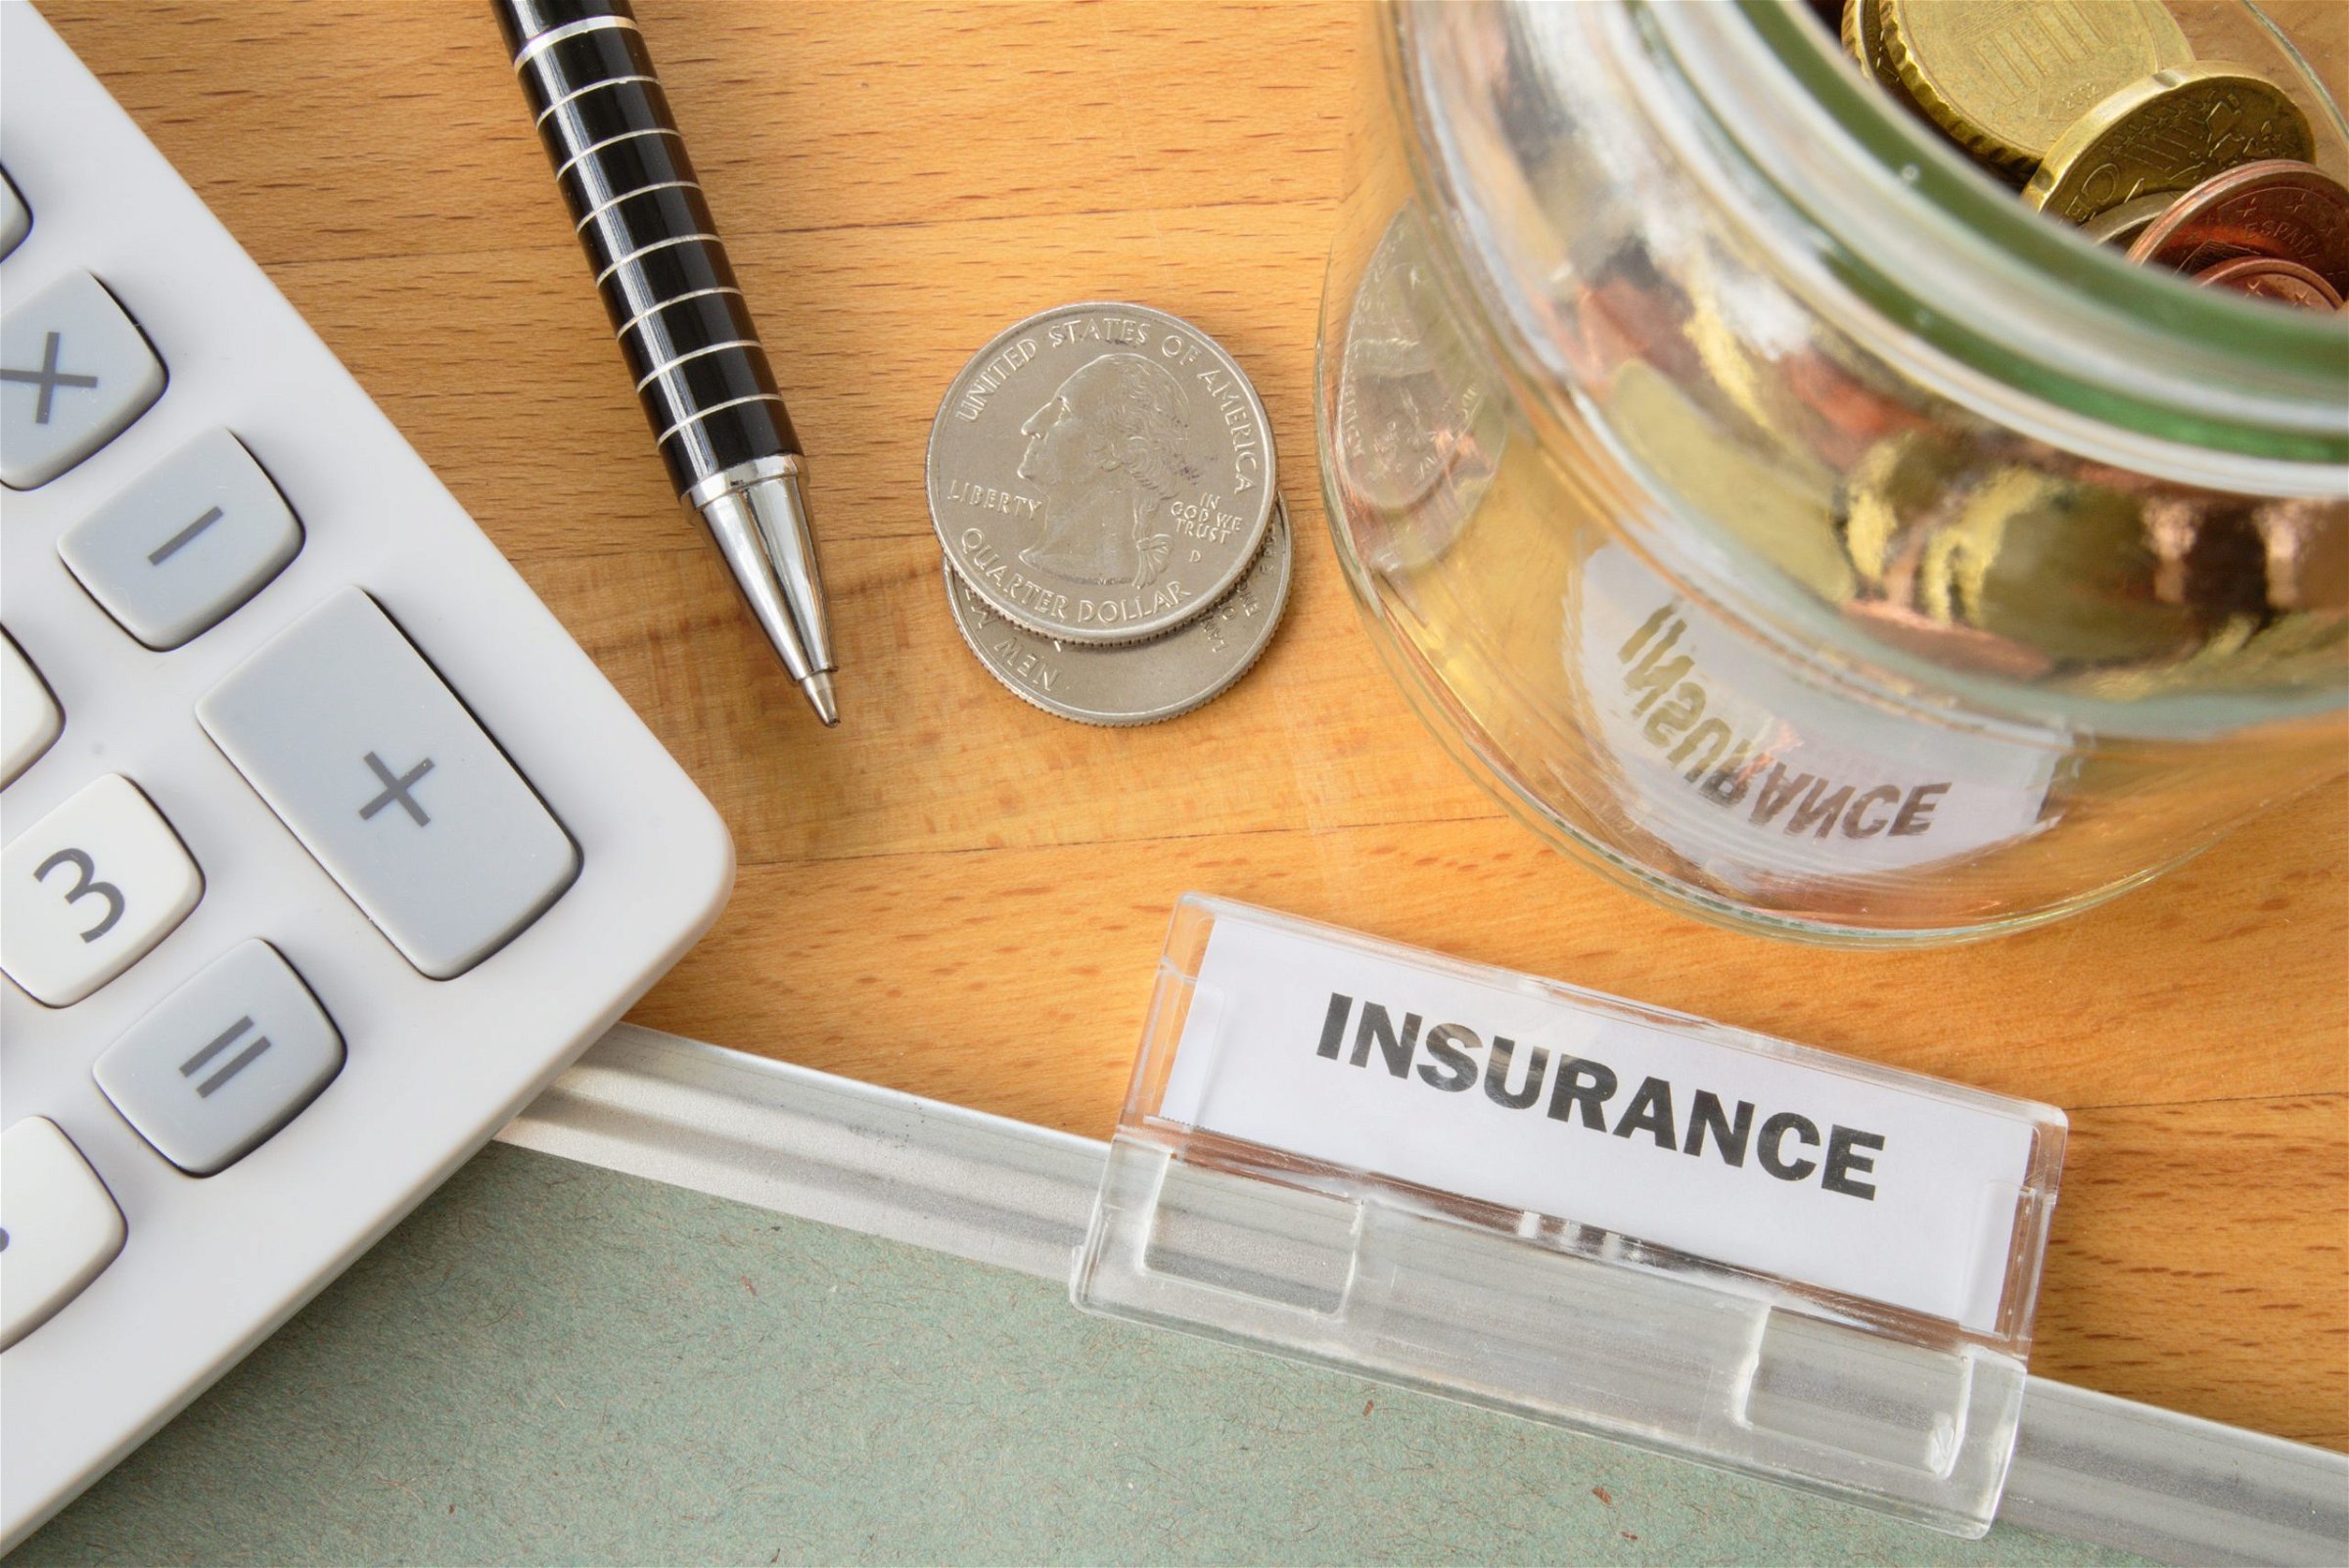 How Can I Become an Insurance Underwriter?